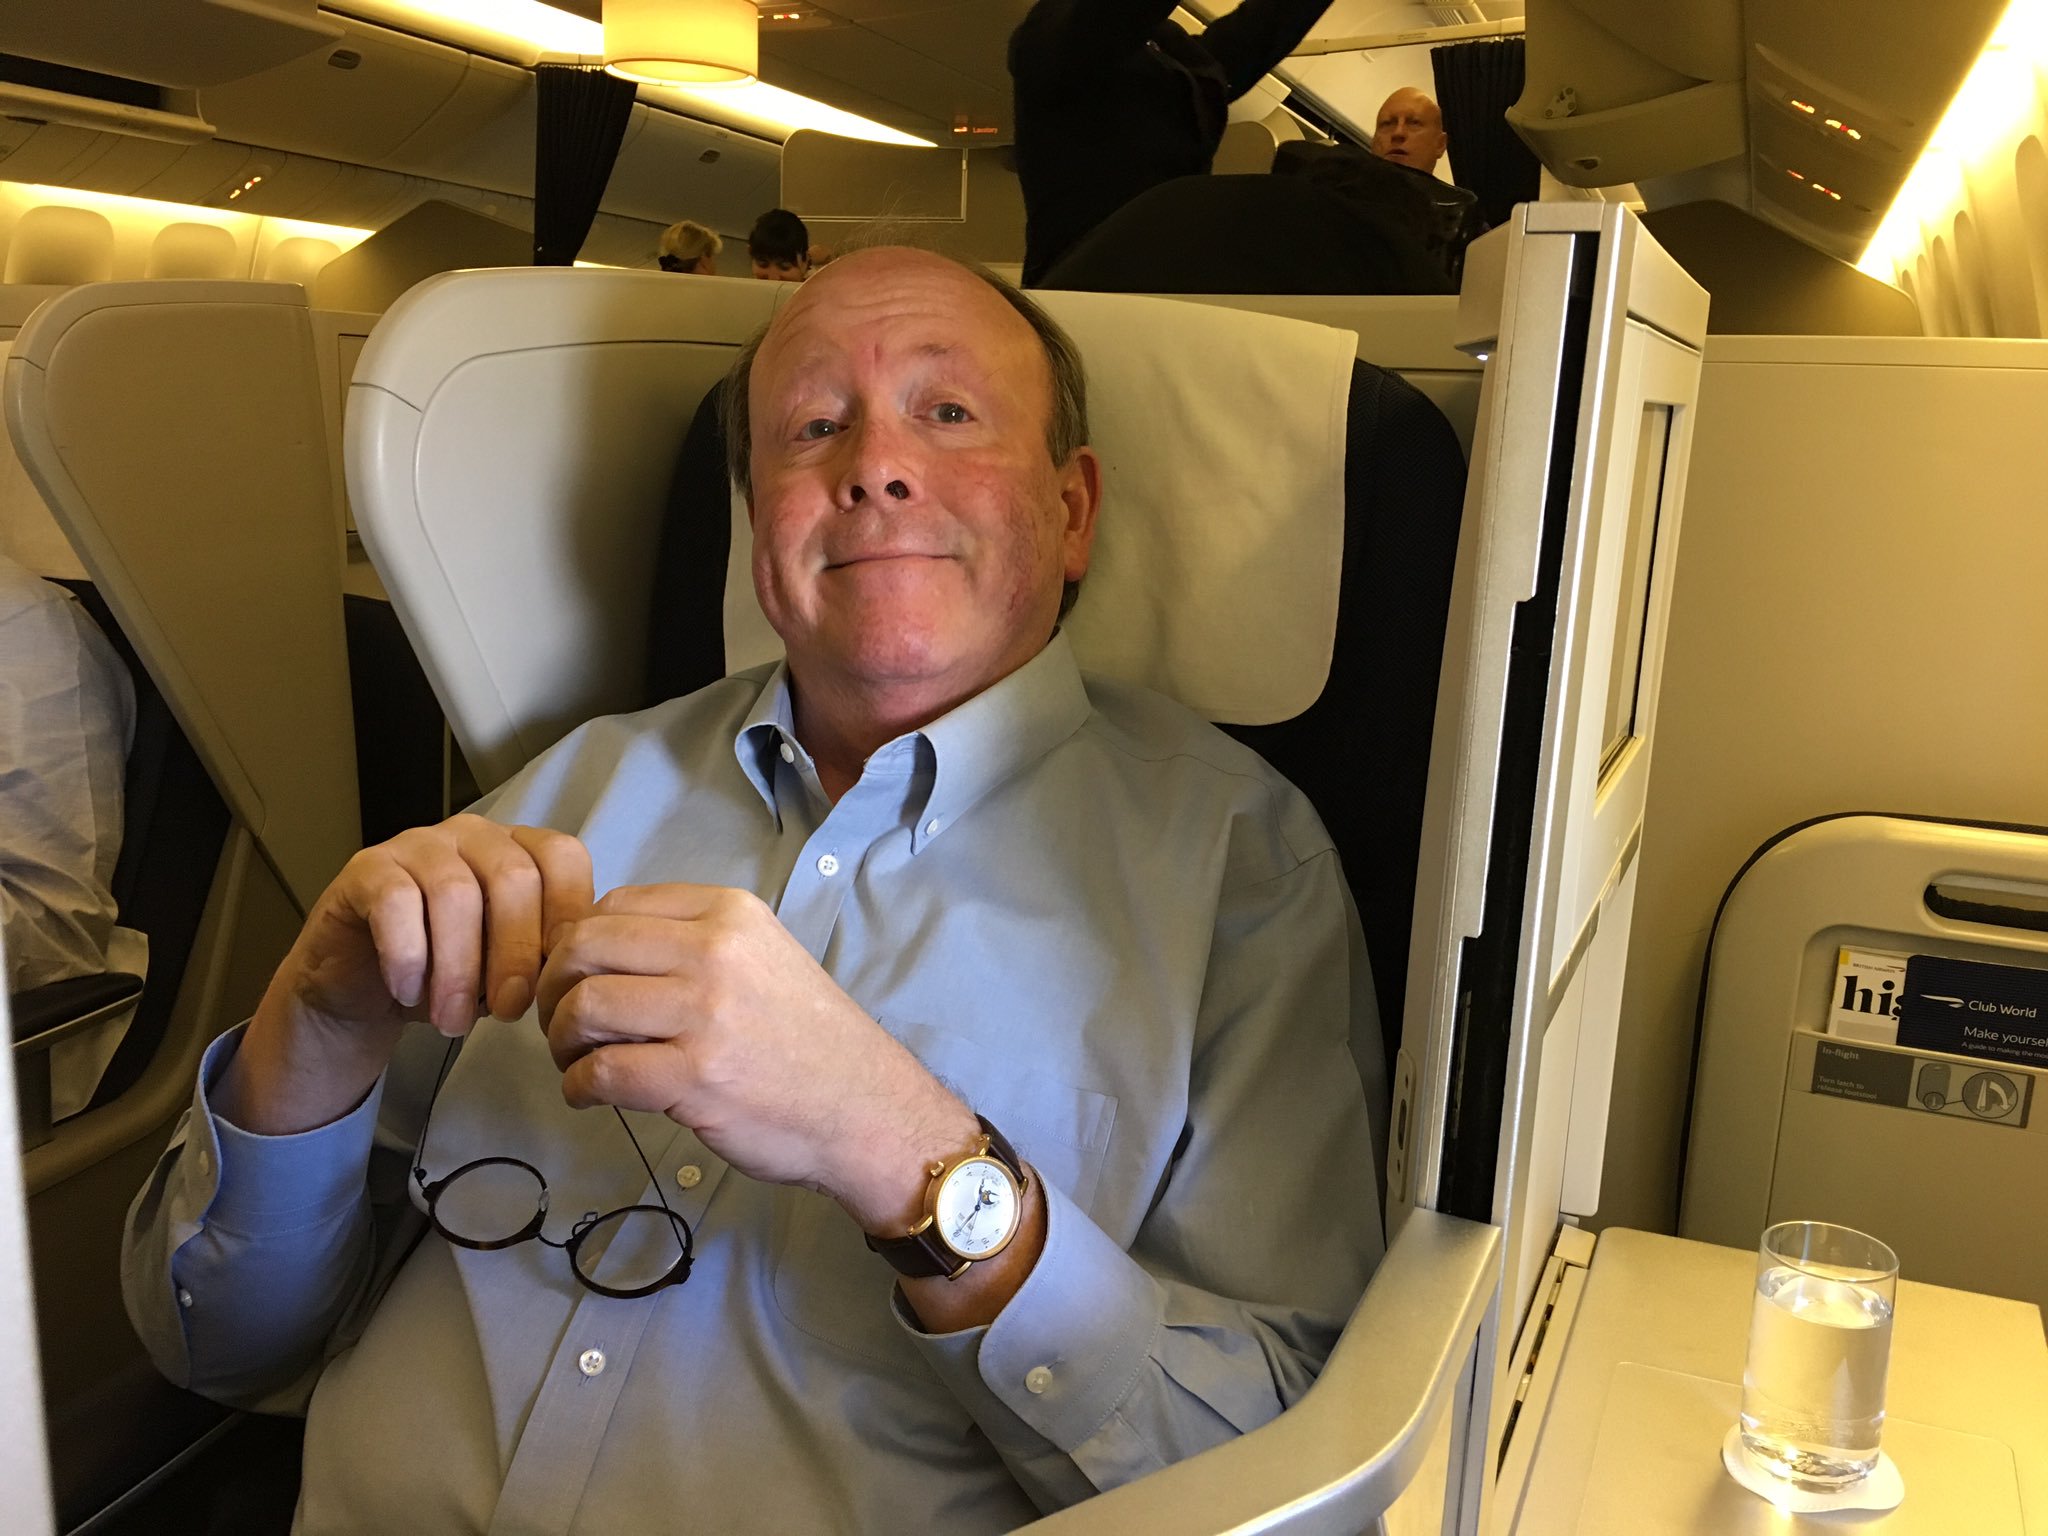 Ken and me in our British Airways seats. A little better than the Cathay coffins. https://t.co/5F2L4IMhY2